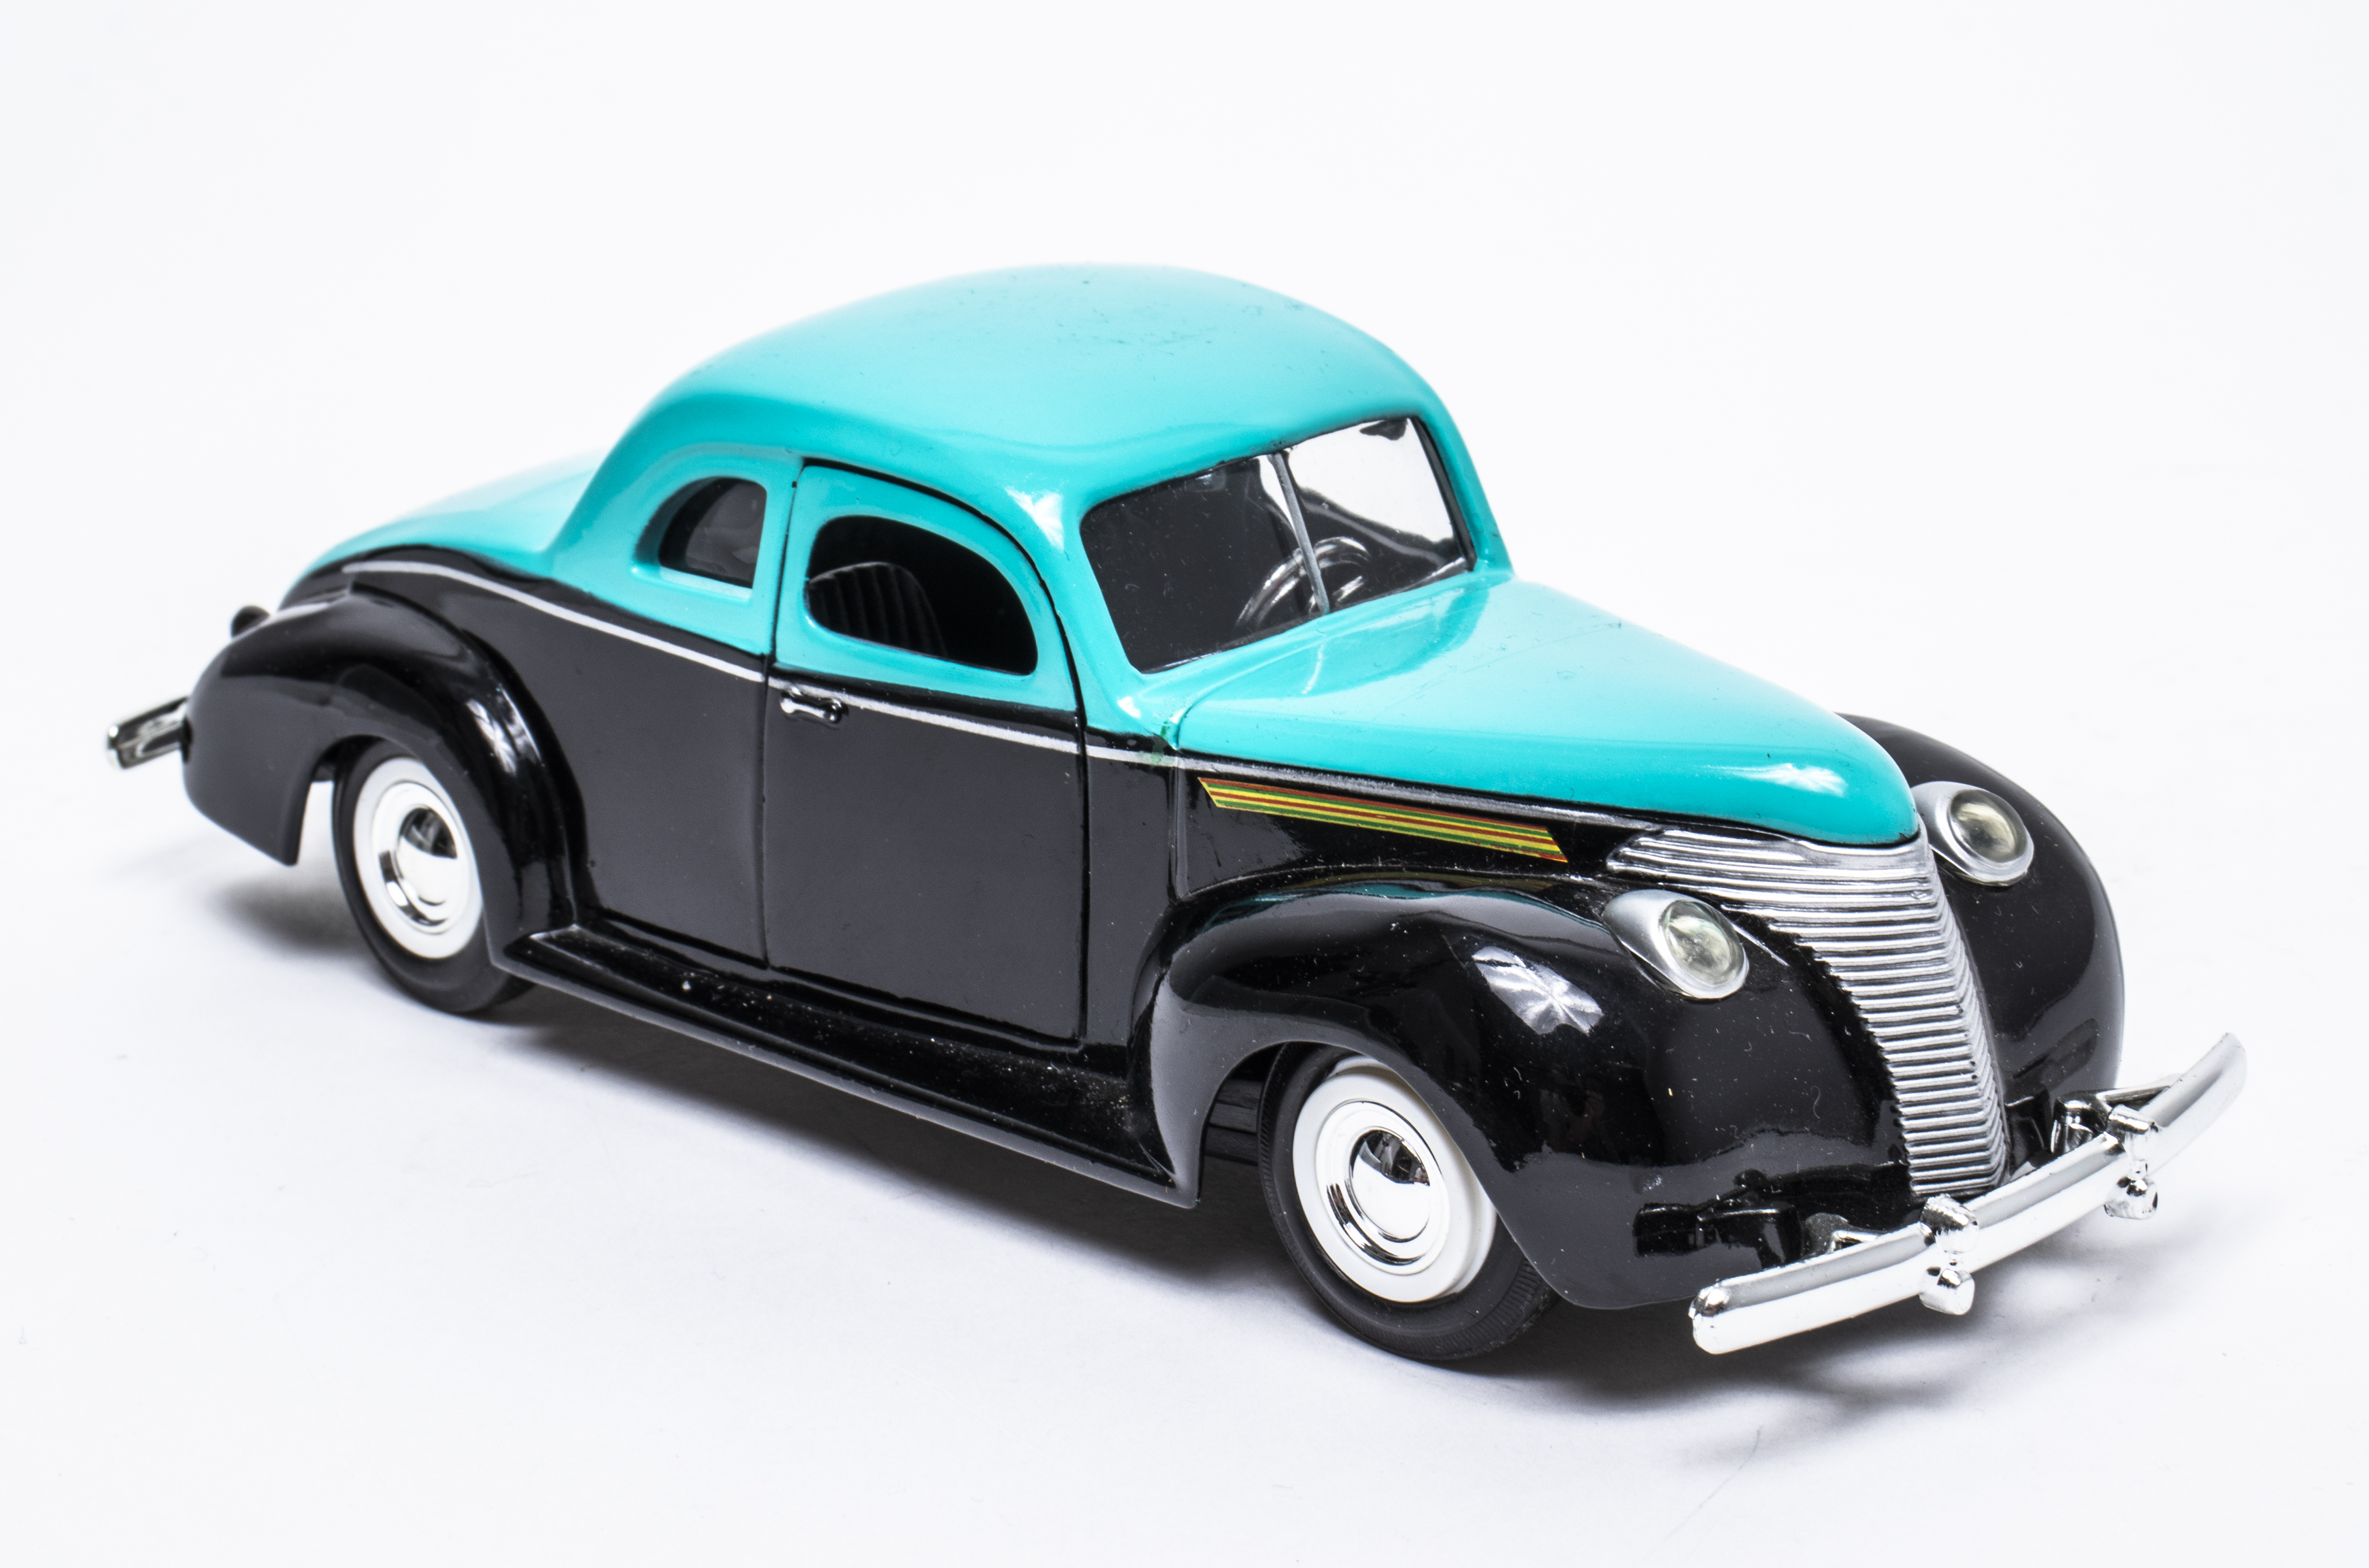 1940 FORD COUPE DIE CAST TOY CAR 3c446f